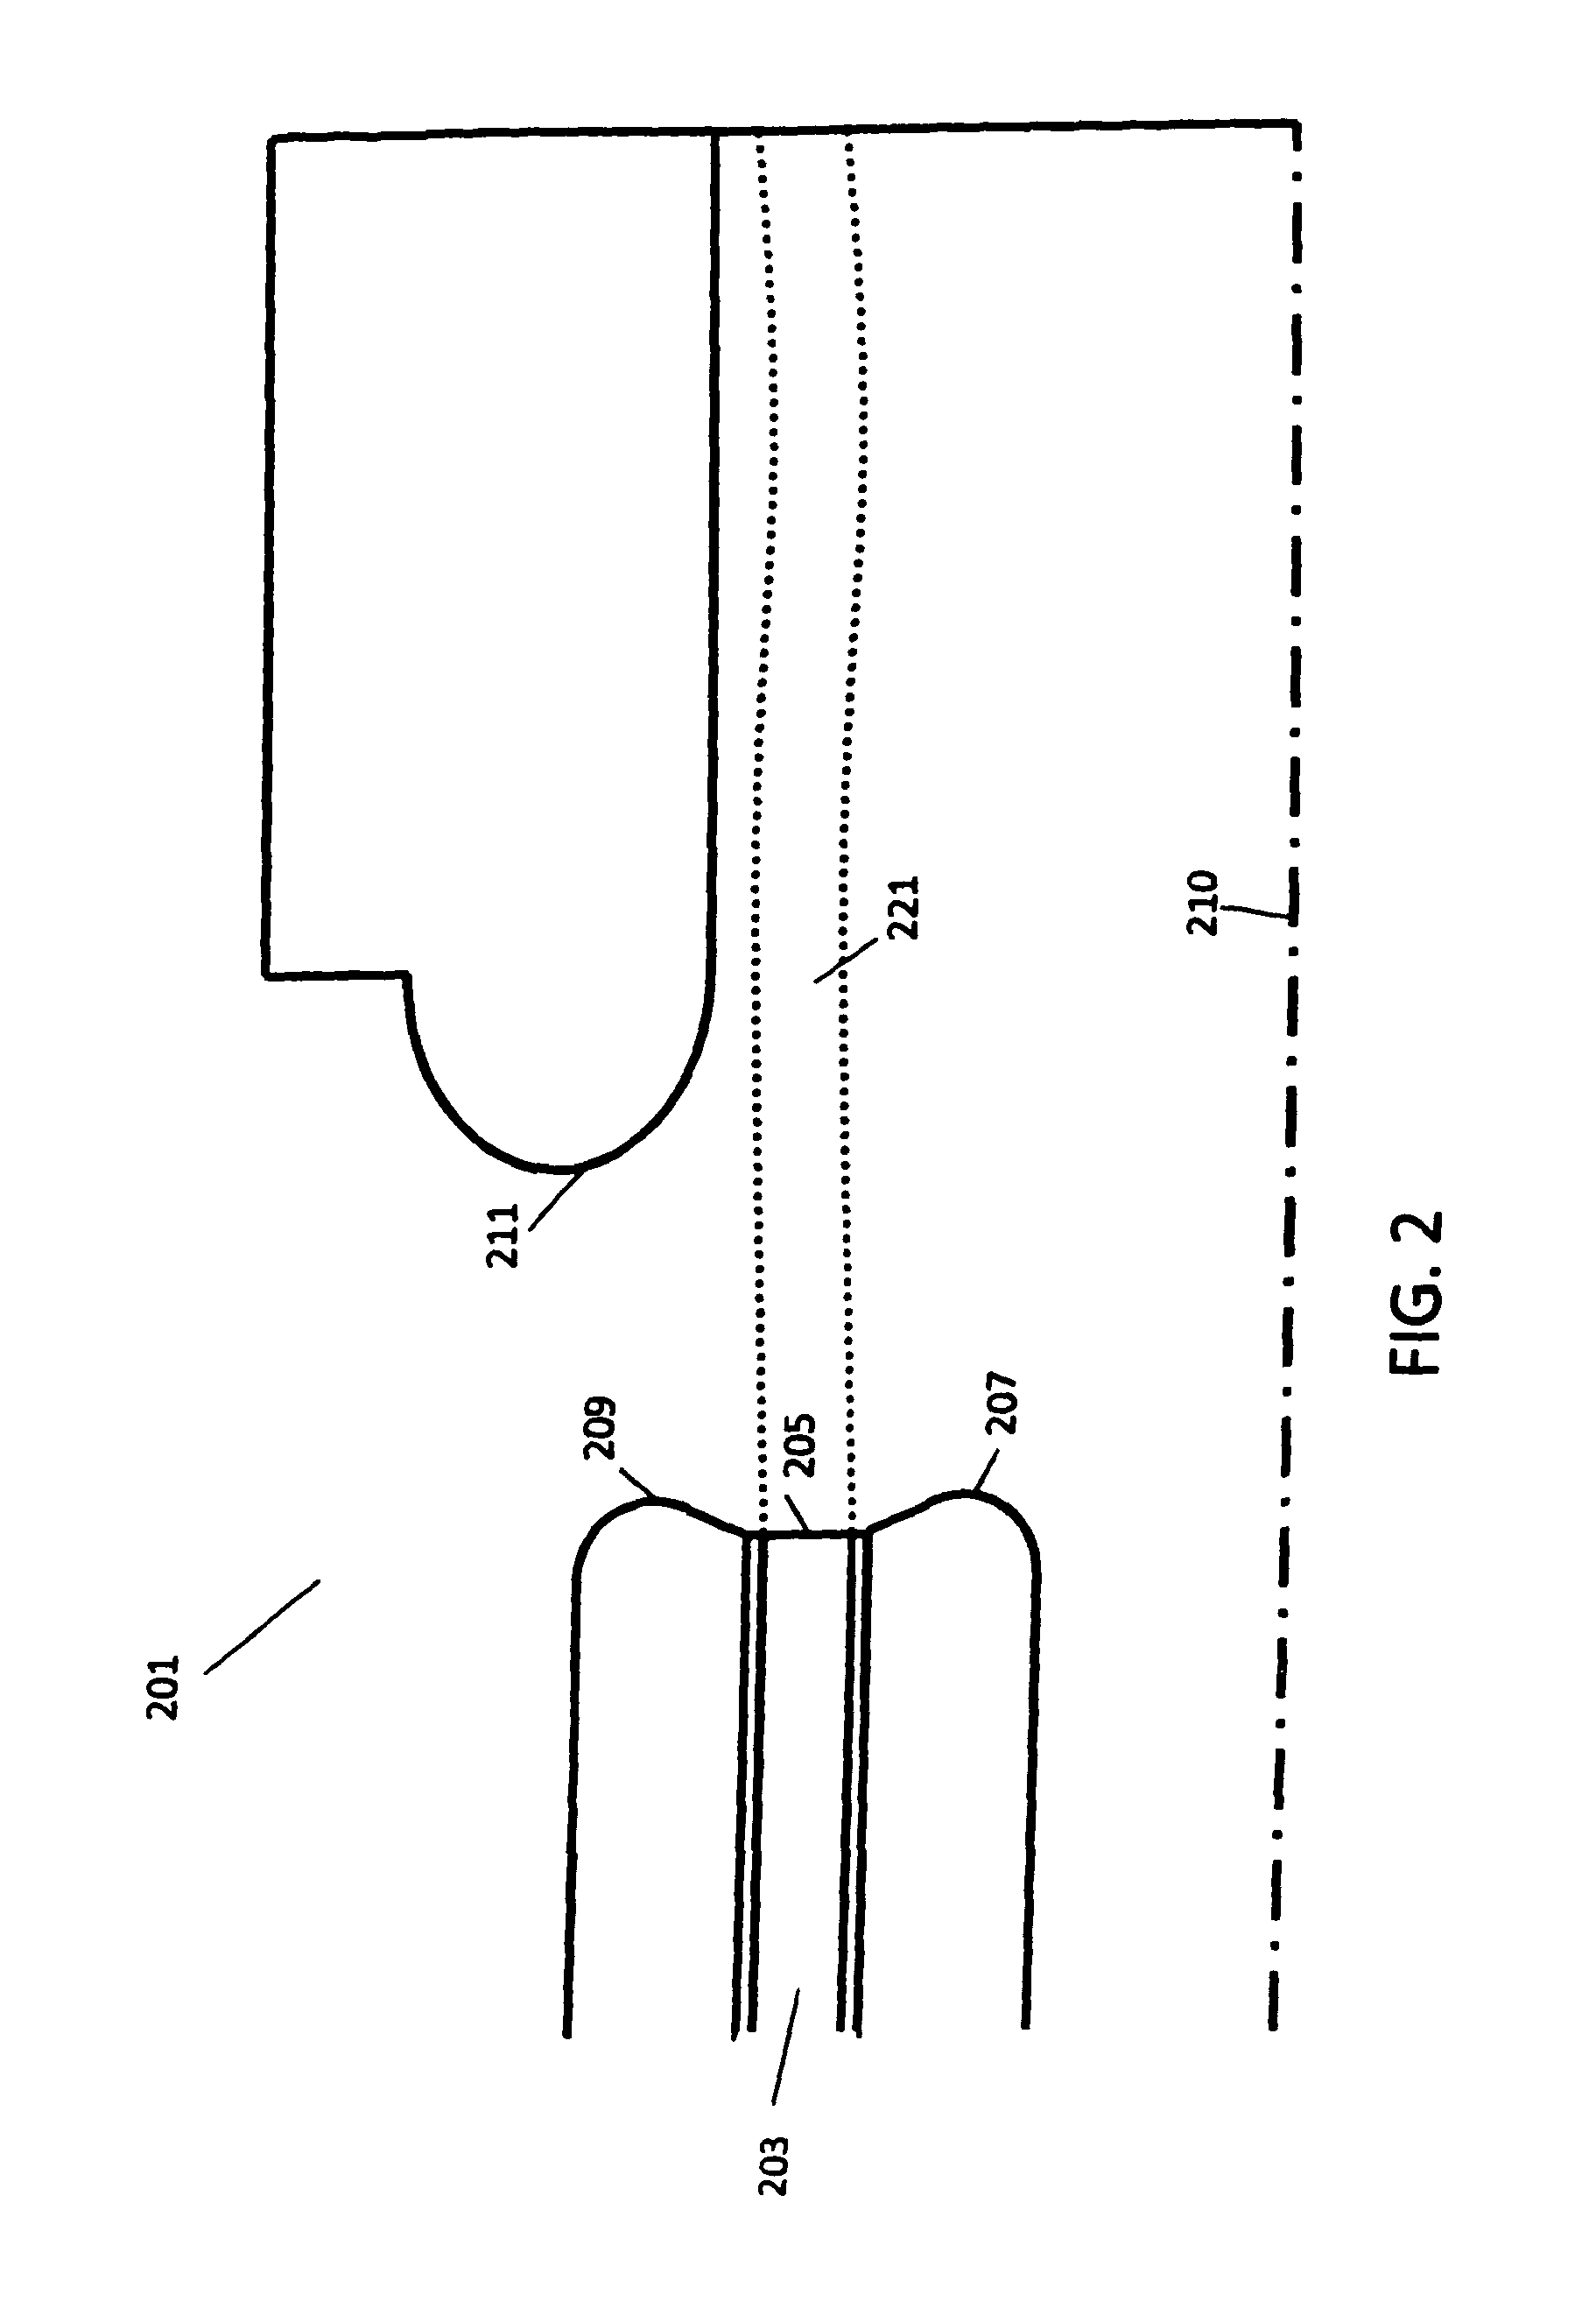 Hollow beam electron gun for use in a klystron